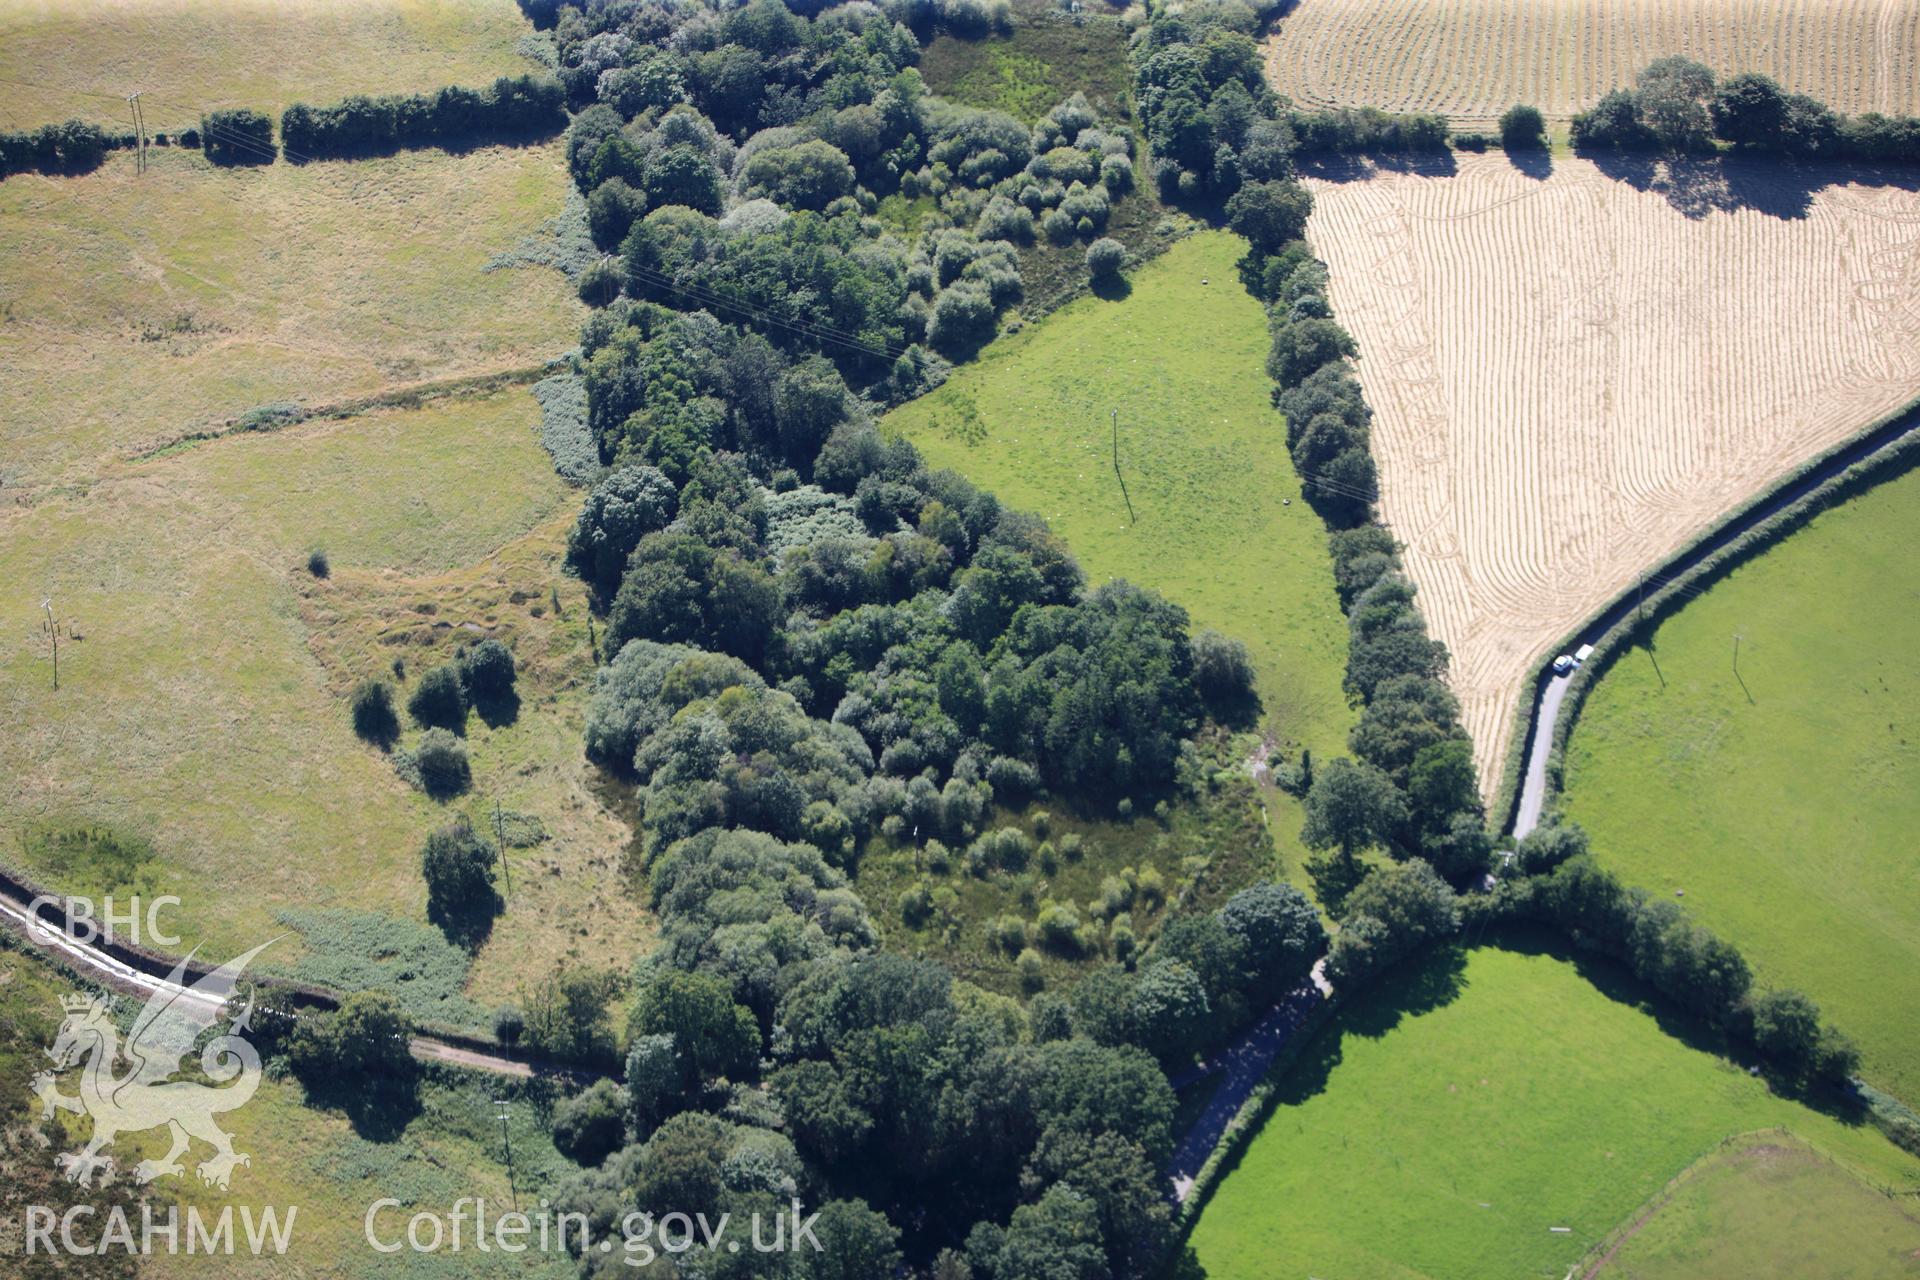 RCAHMW colour oblique photograph of Gwern y Domen, earthworks. Taken by Toby Driver on 24/07/2012.